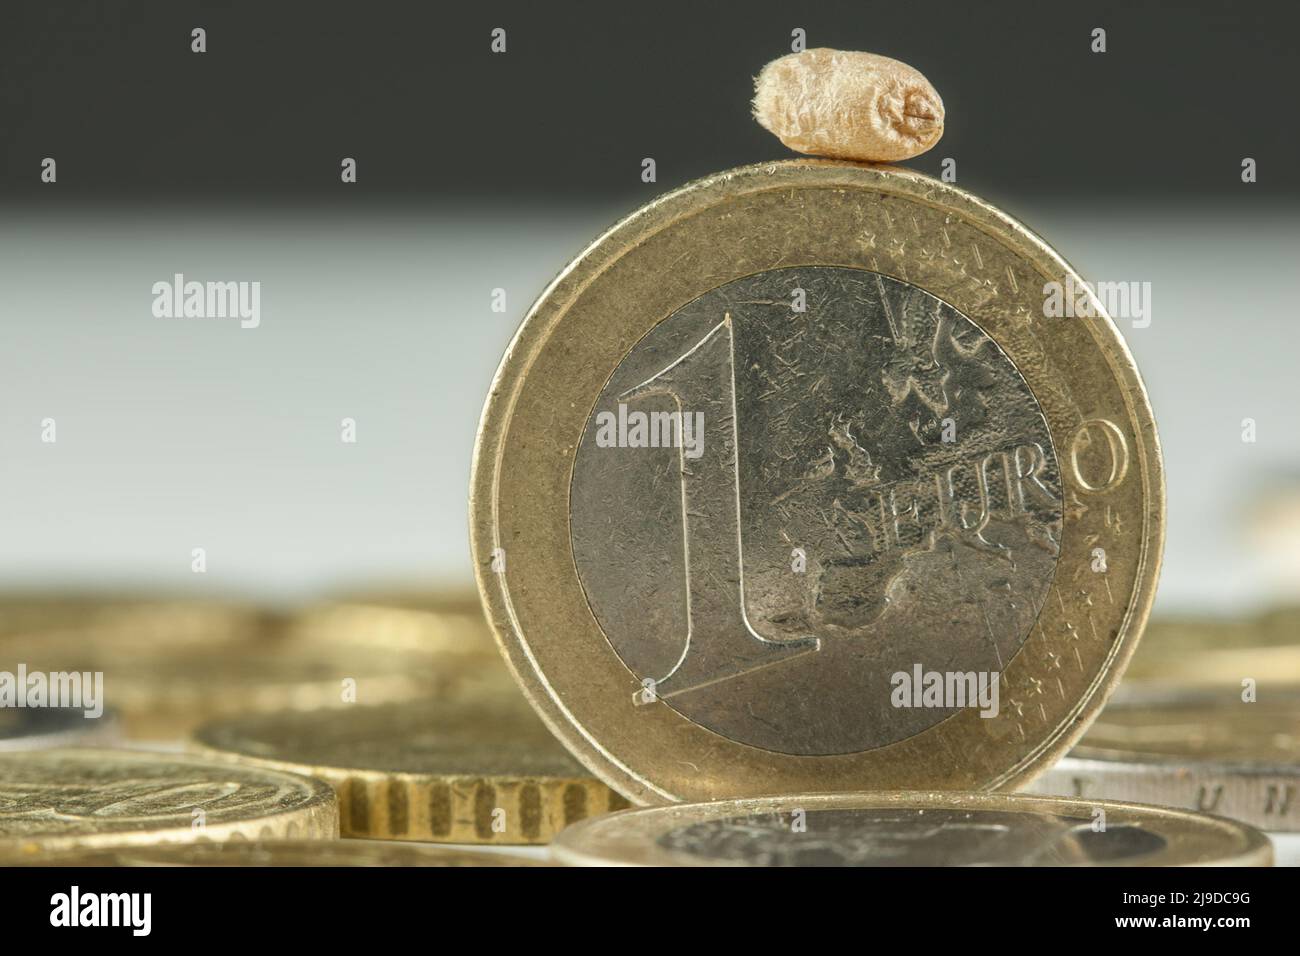 A grain of wheat lies on a standing euro coin. Grain prices continue to rise steeply. Stock Photo